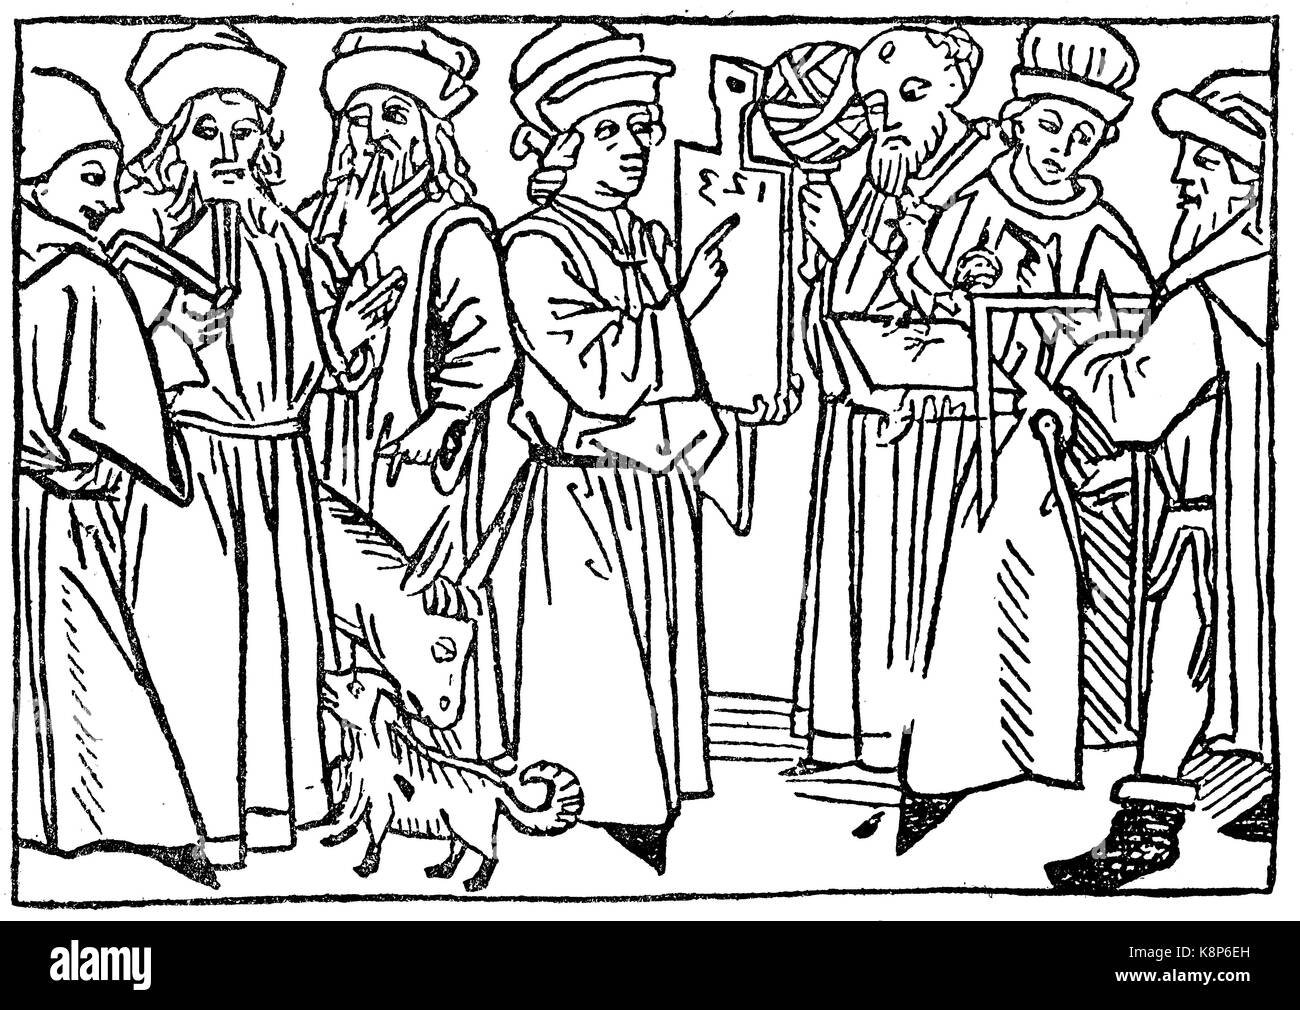 the seven free guilds, Symbolbild für die sieben freien Zünfte, 1479, digital improved reproduction of a woodcut, published in the 19th century Stock Photo